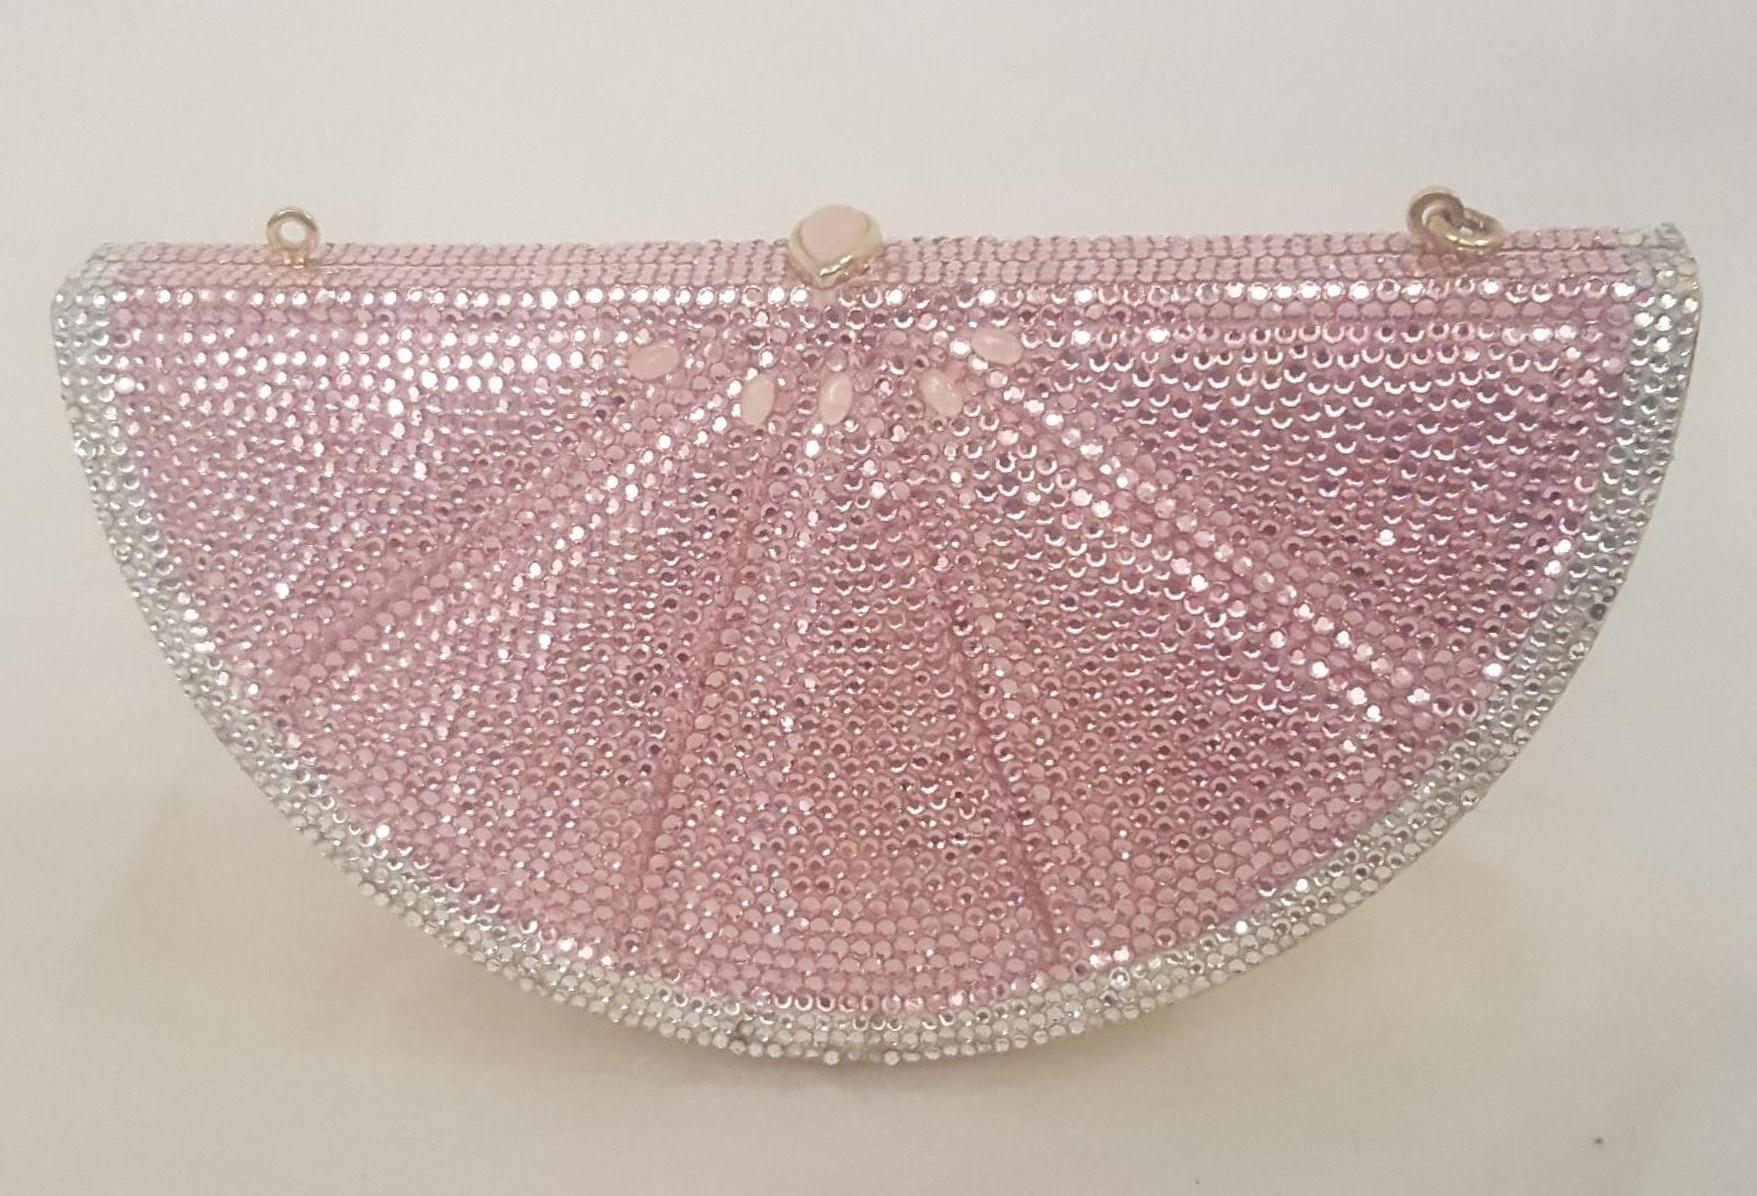 This glittering crystal grapefruit slice Judith Leiber clutch is made from pink and white Austrian crystals.  The  grapefruit slice is highlighted with a gold tone frame silhouette resembling the outer skin.  This bag has a seed shape push lock